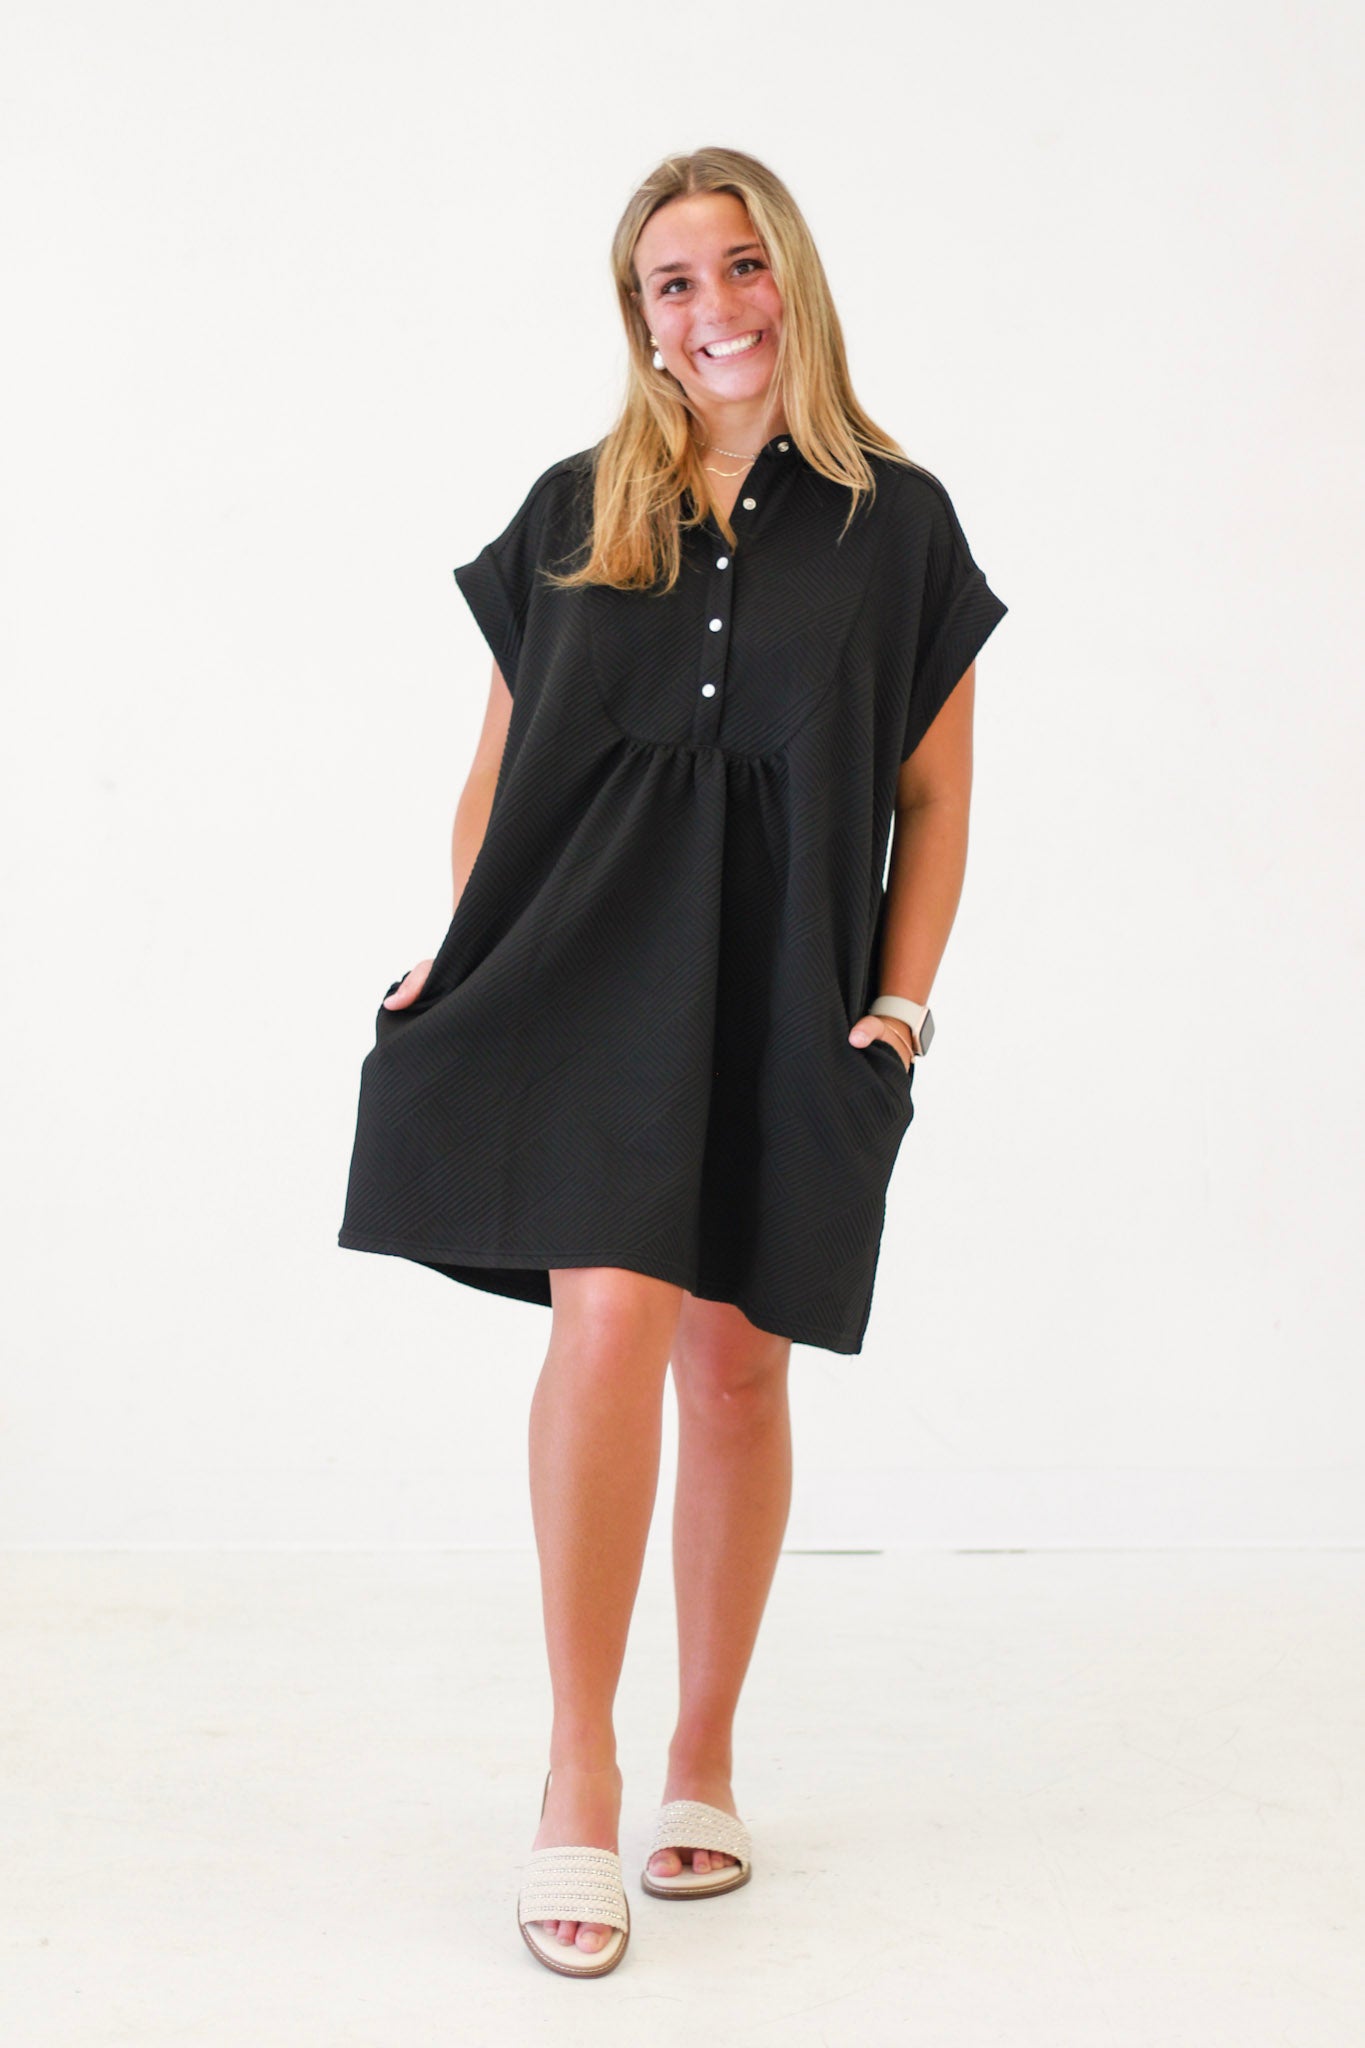 Go Out With Me Textured Black Dress